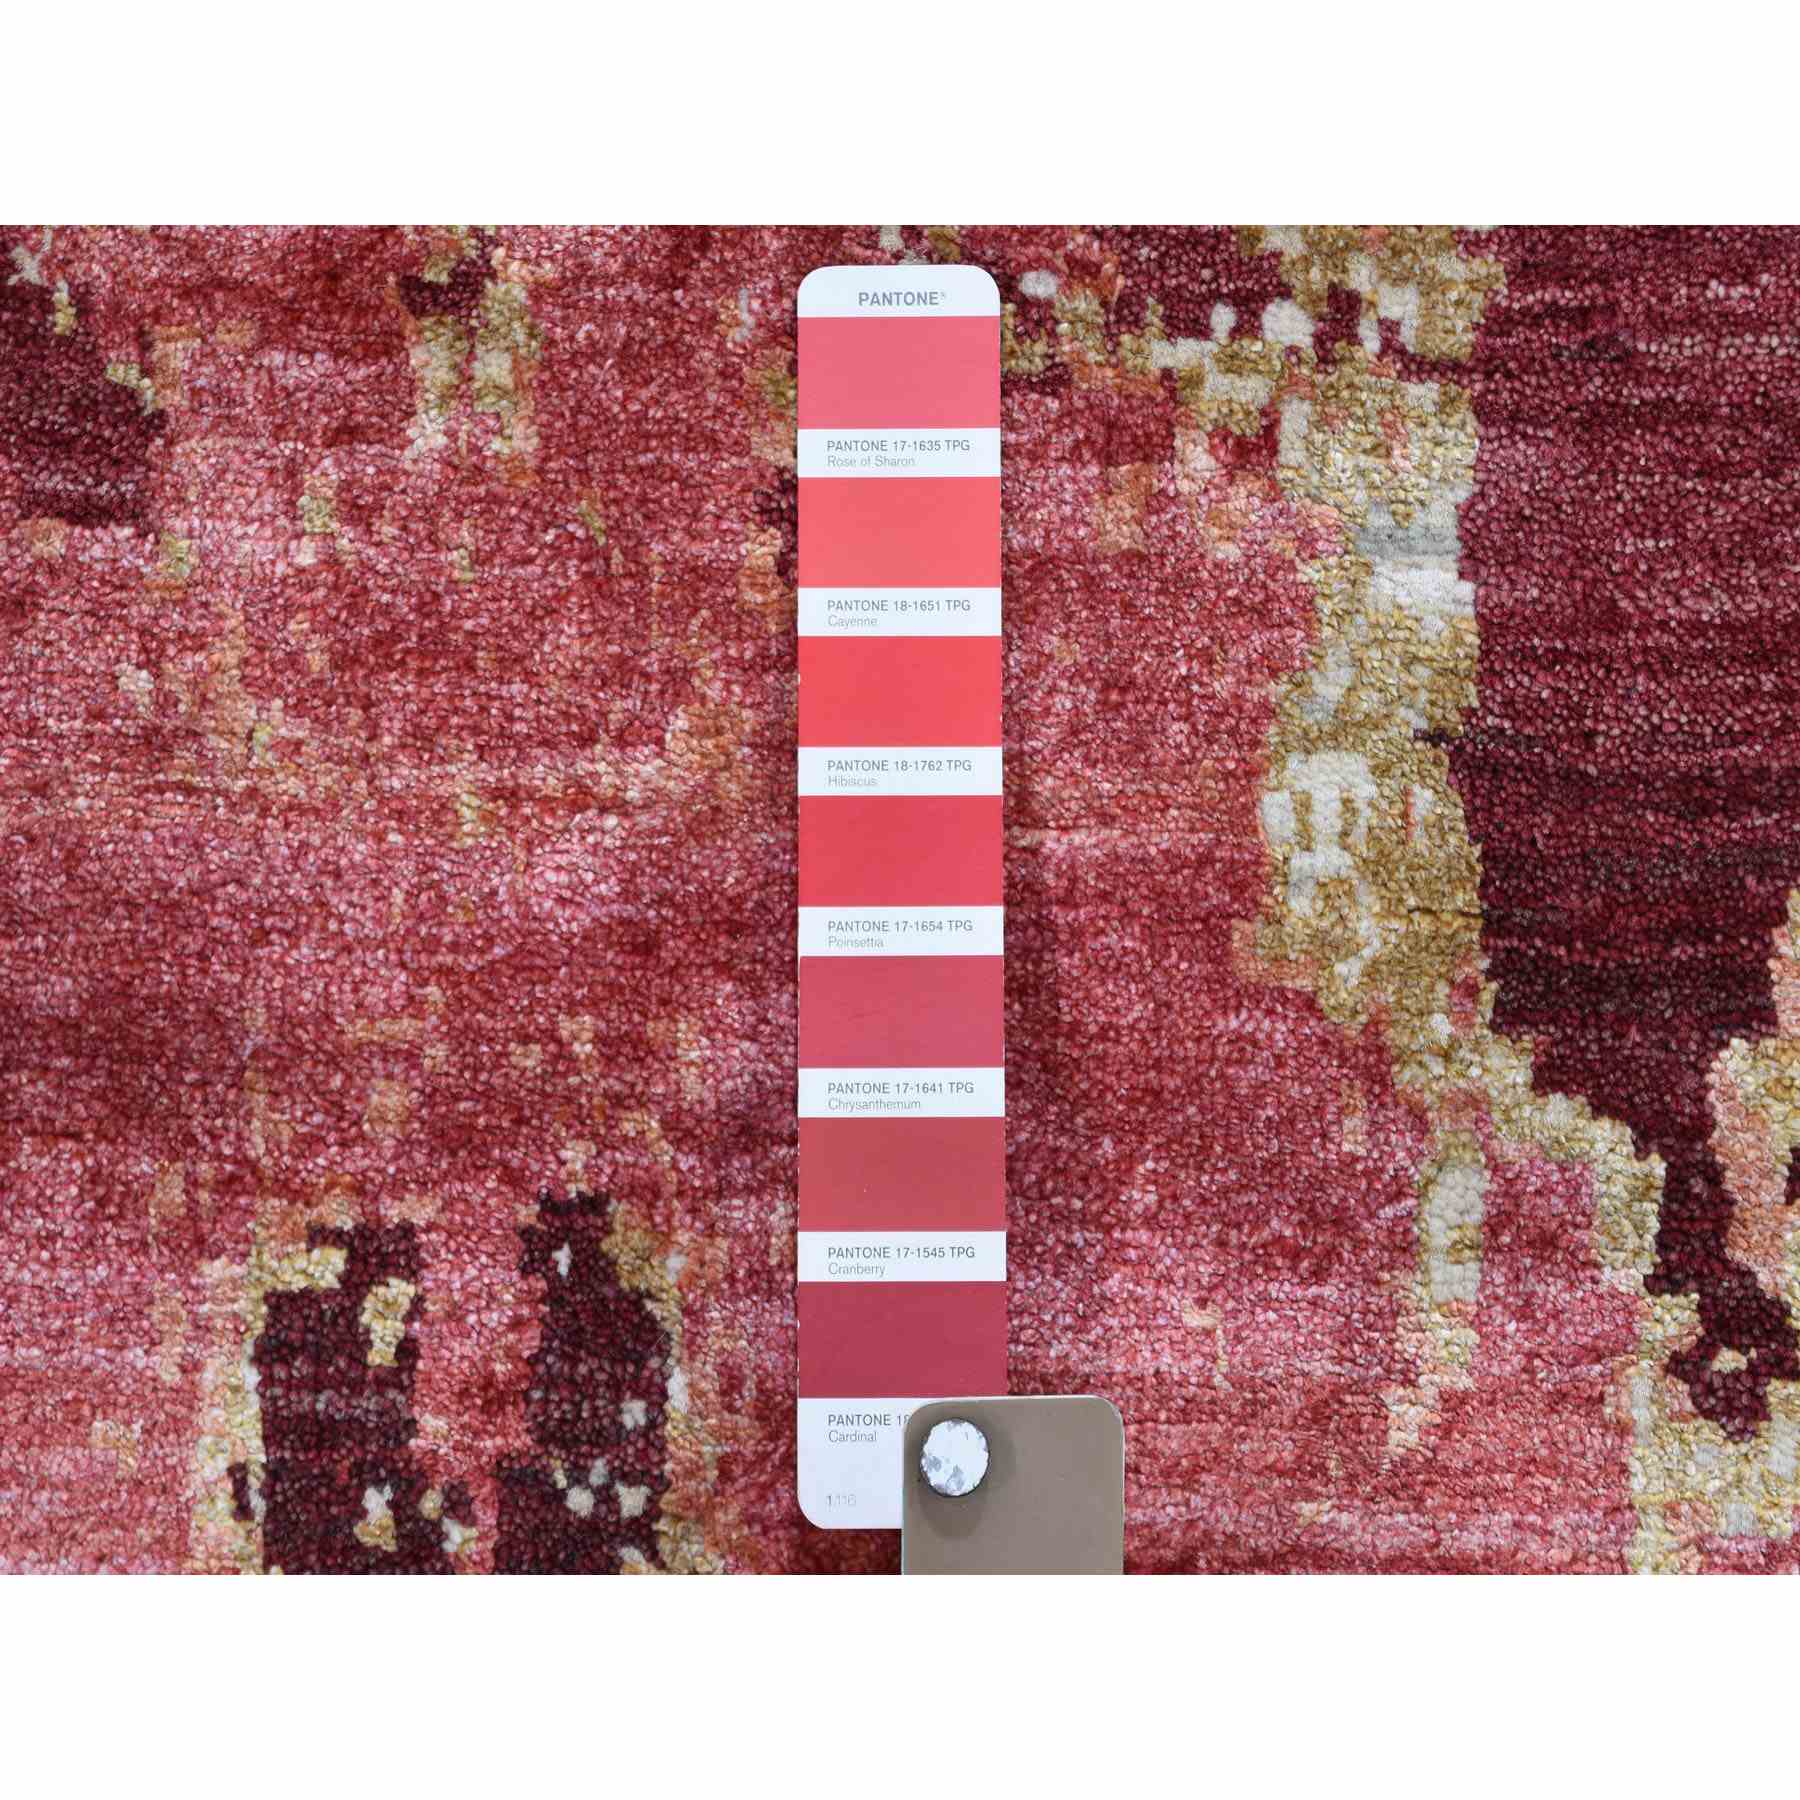 9-x12-3  Cranberry Abstract Design Wool And Silk Hand Knotted Oriental Rug 